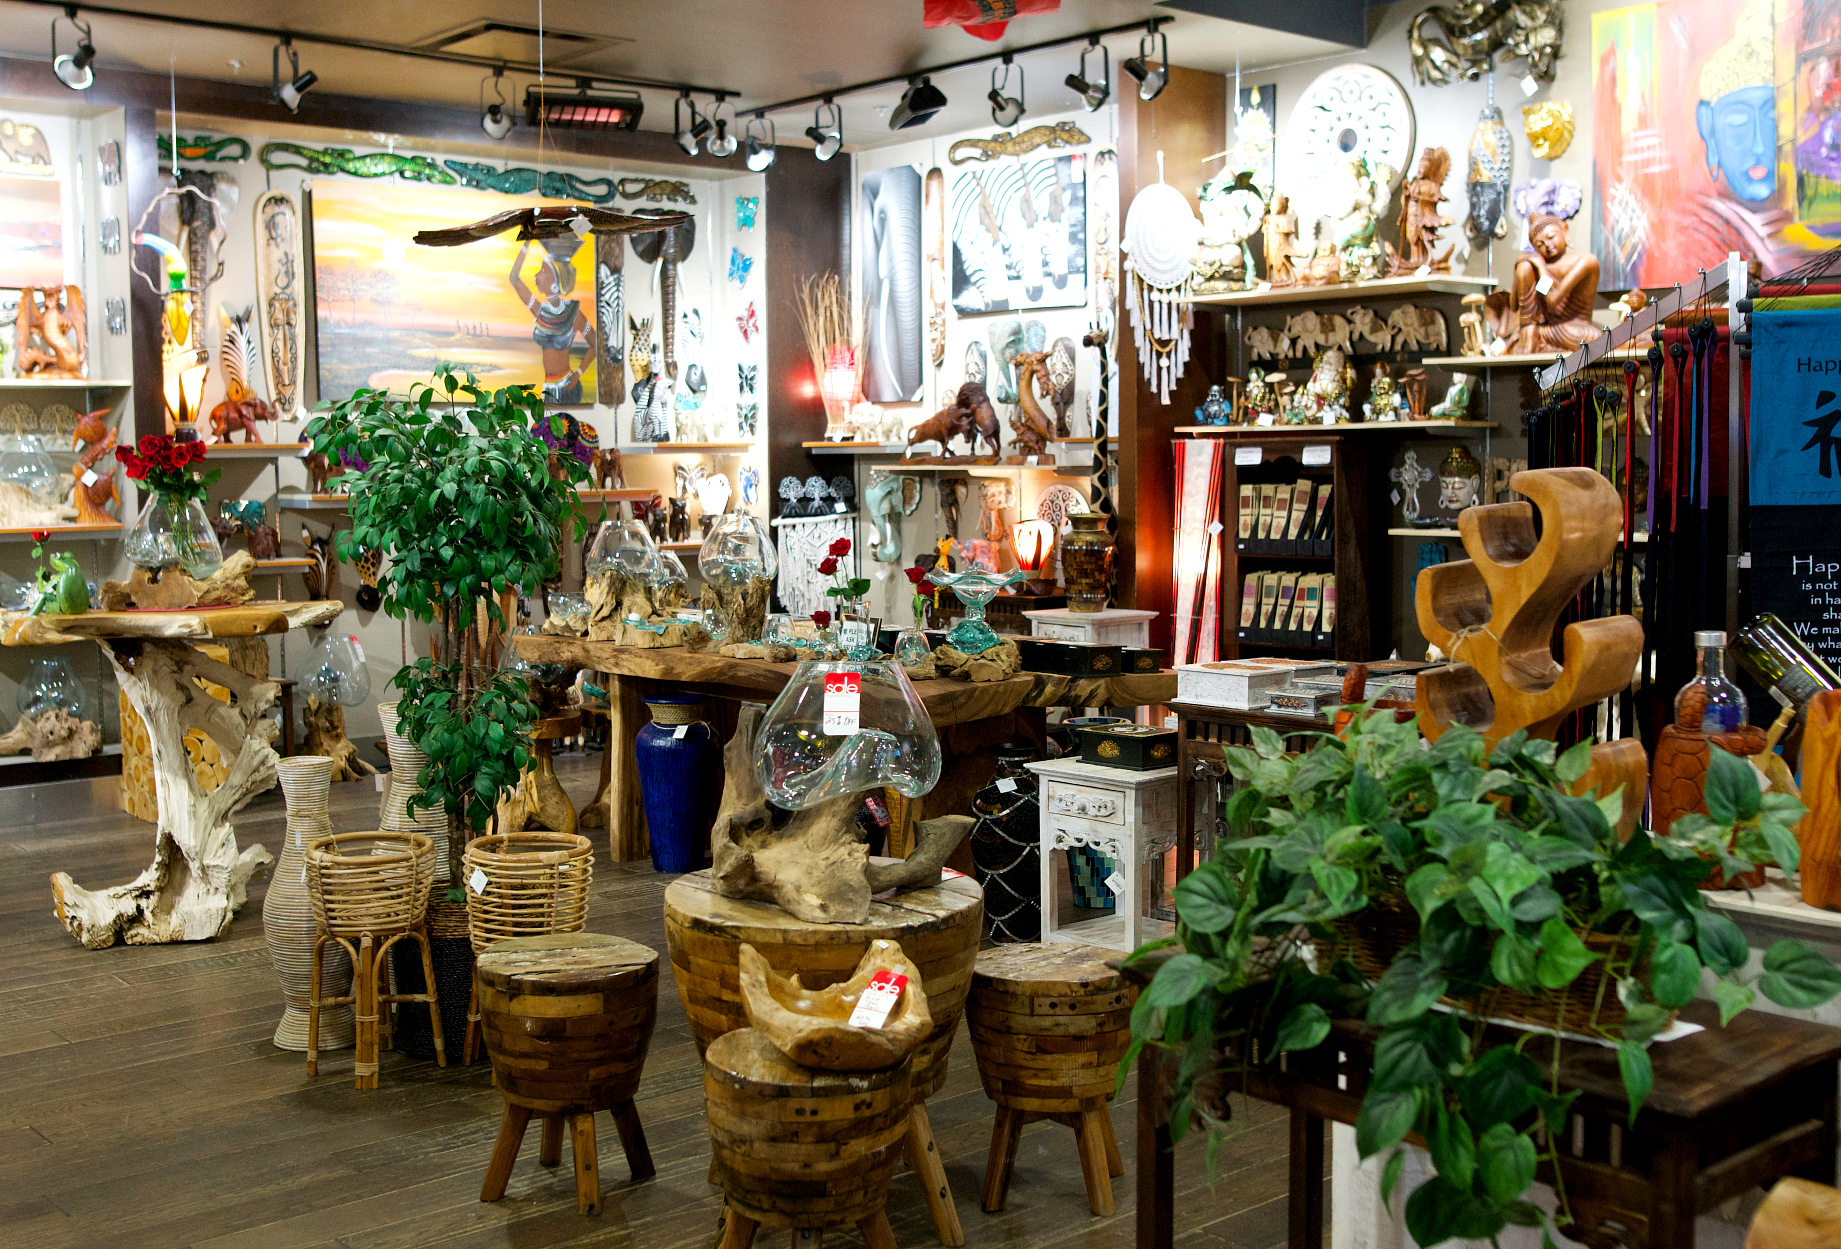 store interior with hand carved, wooden ornaments and stools with potted plants